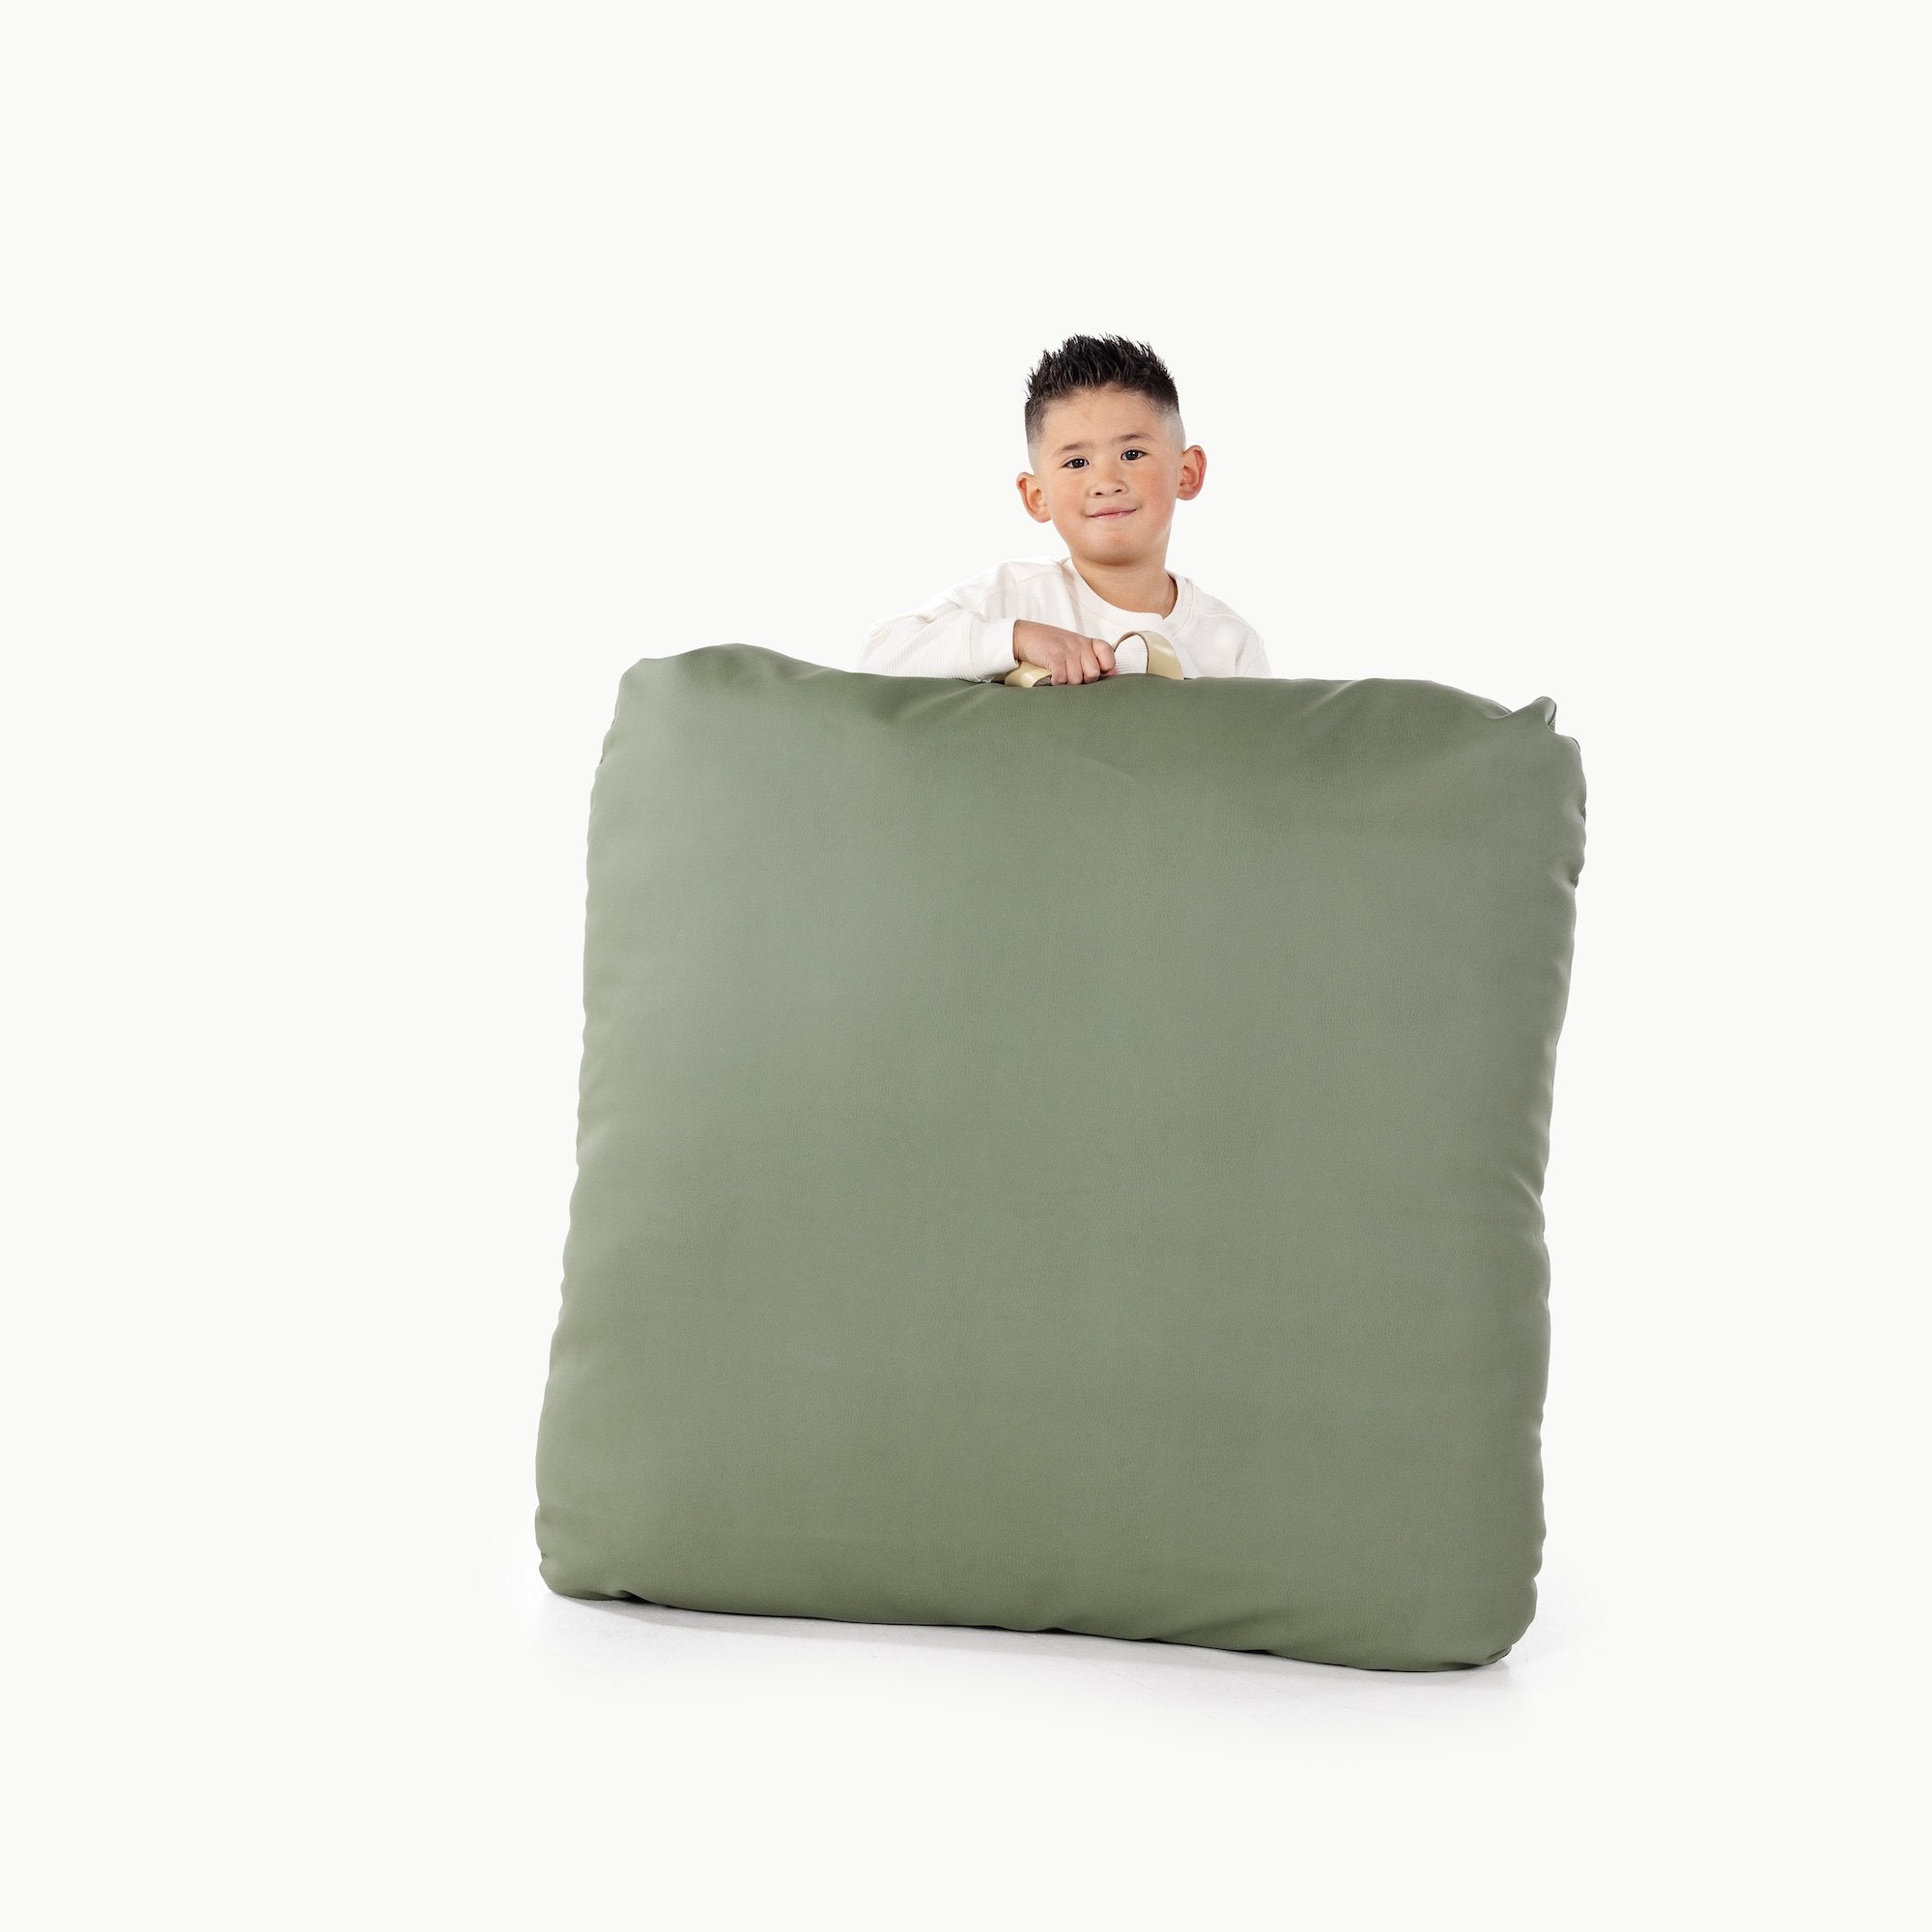 Thyme / Square@Kid holding the Thyme Square Floor Cushion